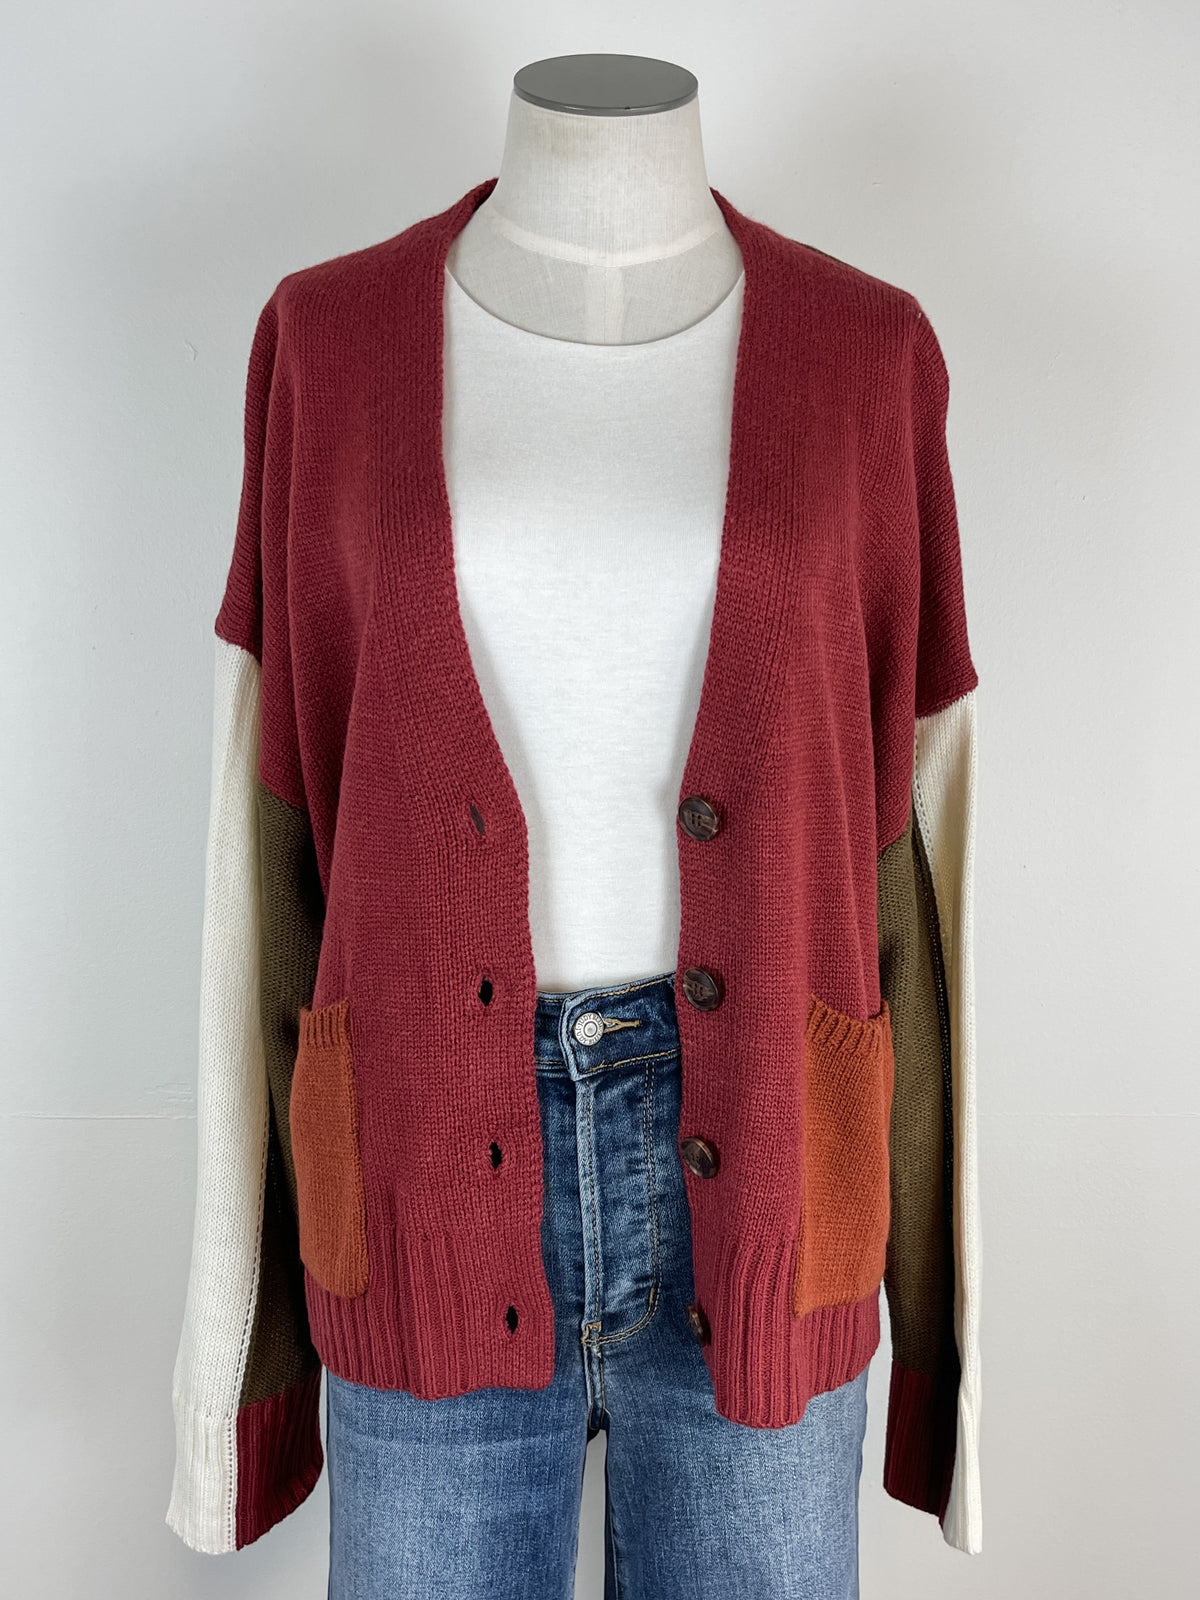 Astylish Open-Front Cardigan Is the Perfect Cozy Sweater